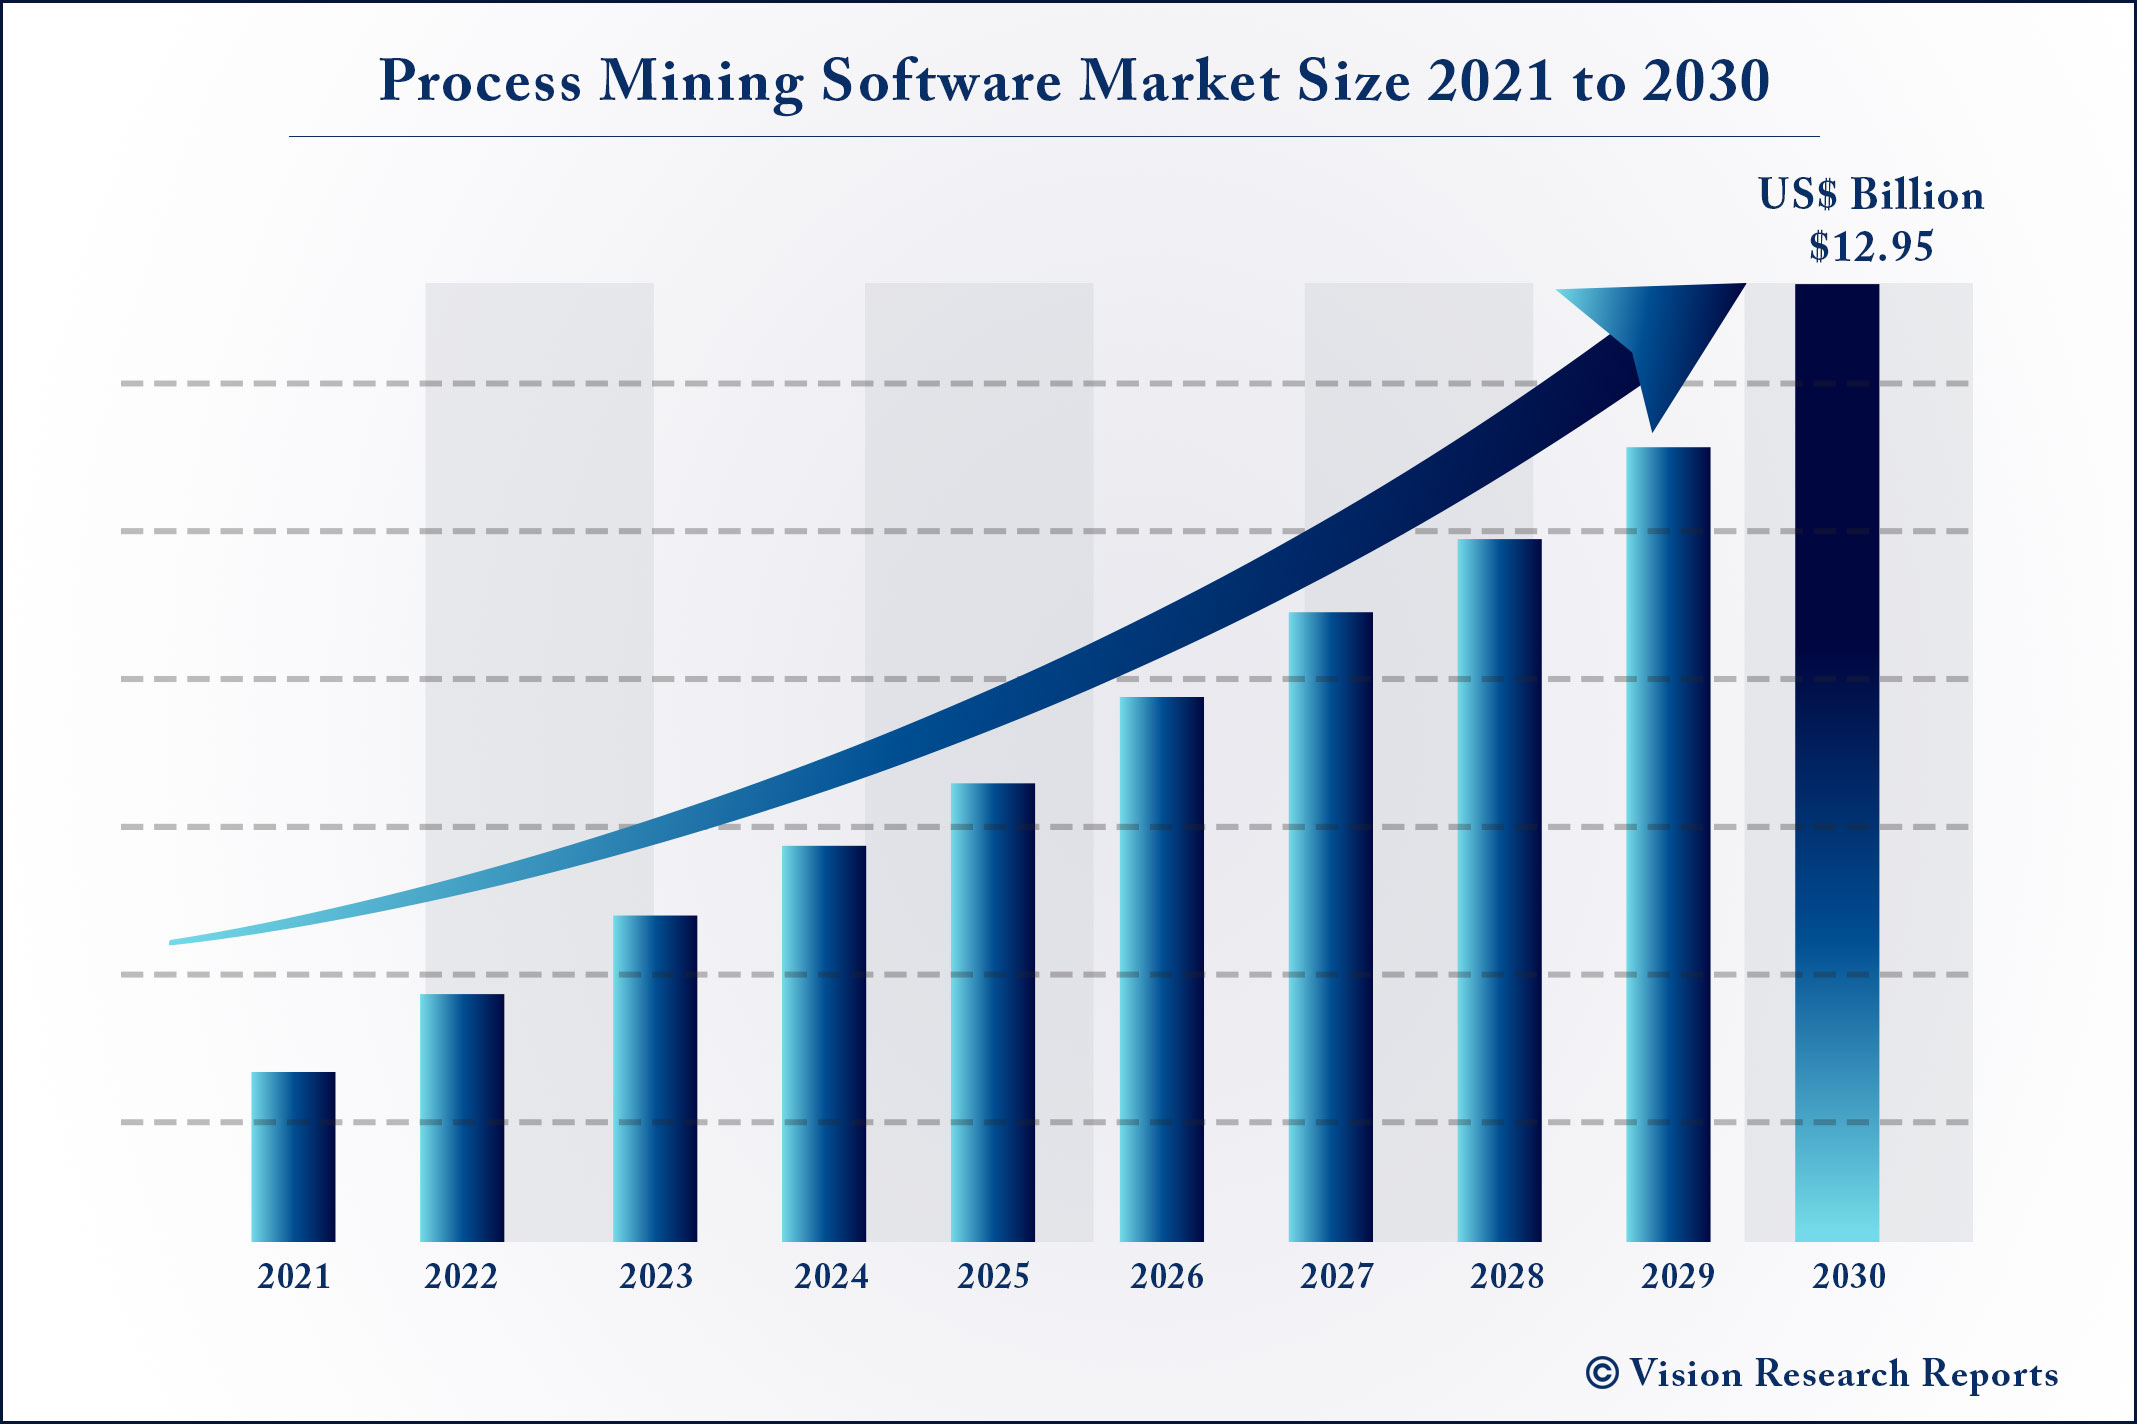 Lead Mining Software Market Size, Share & Trends - 